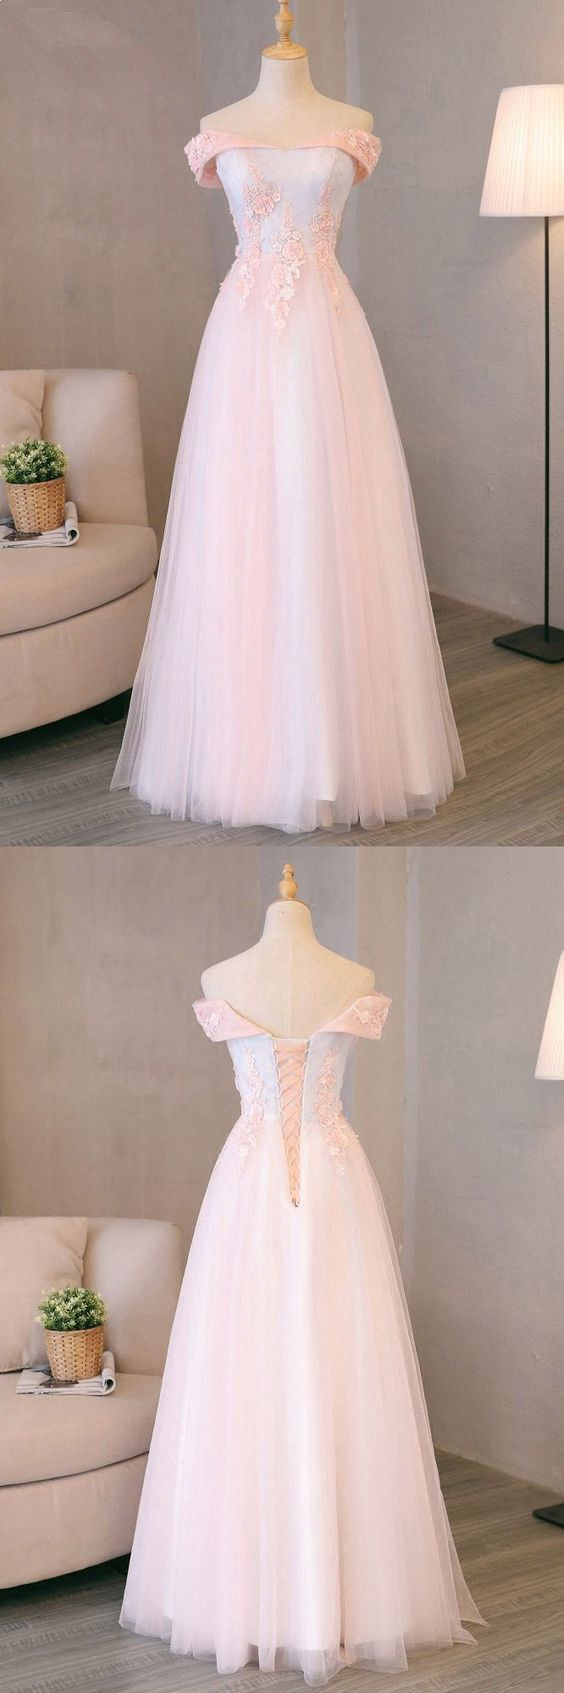 Pink And Light Blue Sweetheart Tulle Prom Dress 2019, Charming Formal Gown 2019, Party Dress 2019